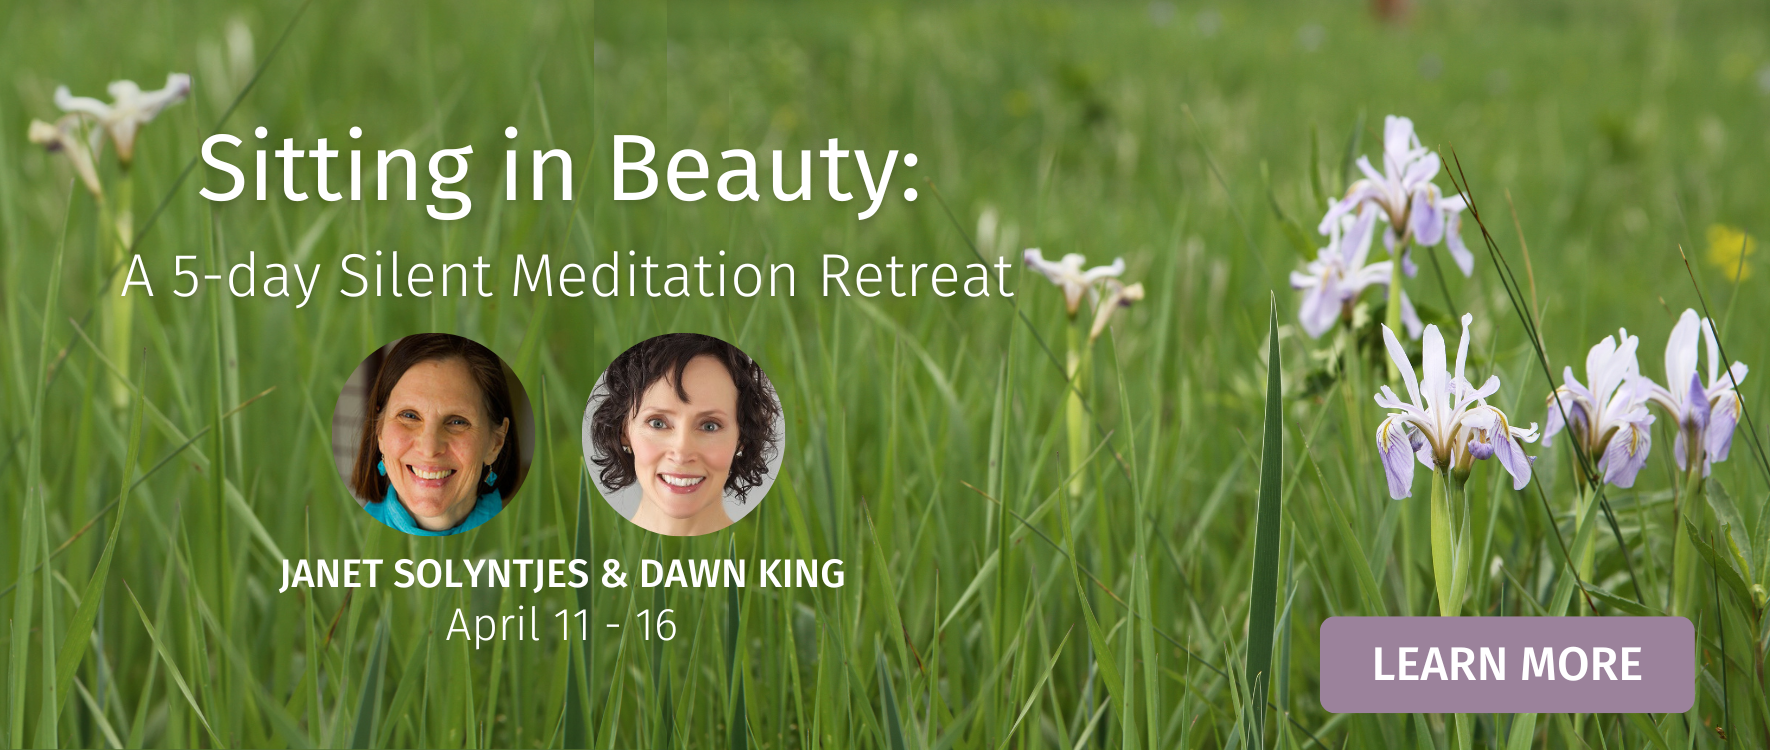 Sitting in Beauty: A 5-day Silent Meditation Retreat, April 11-16, 2023